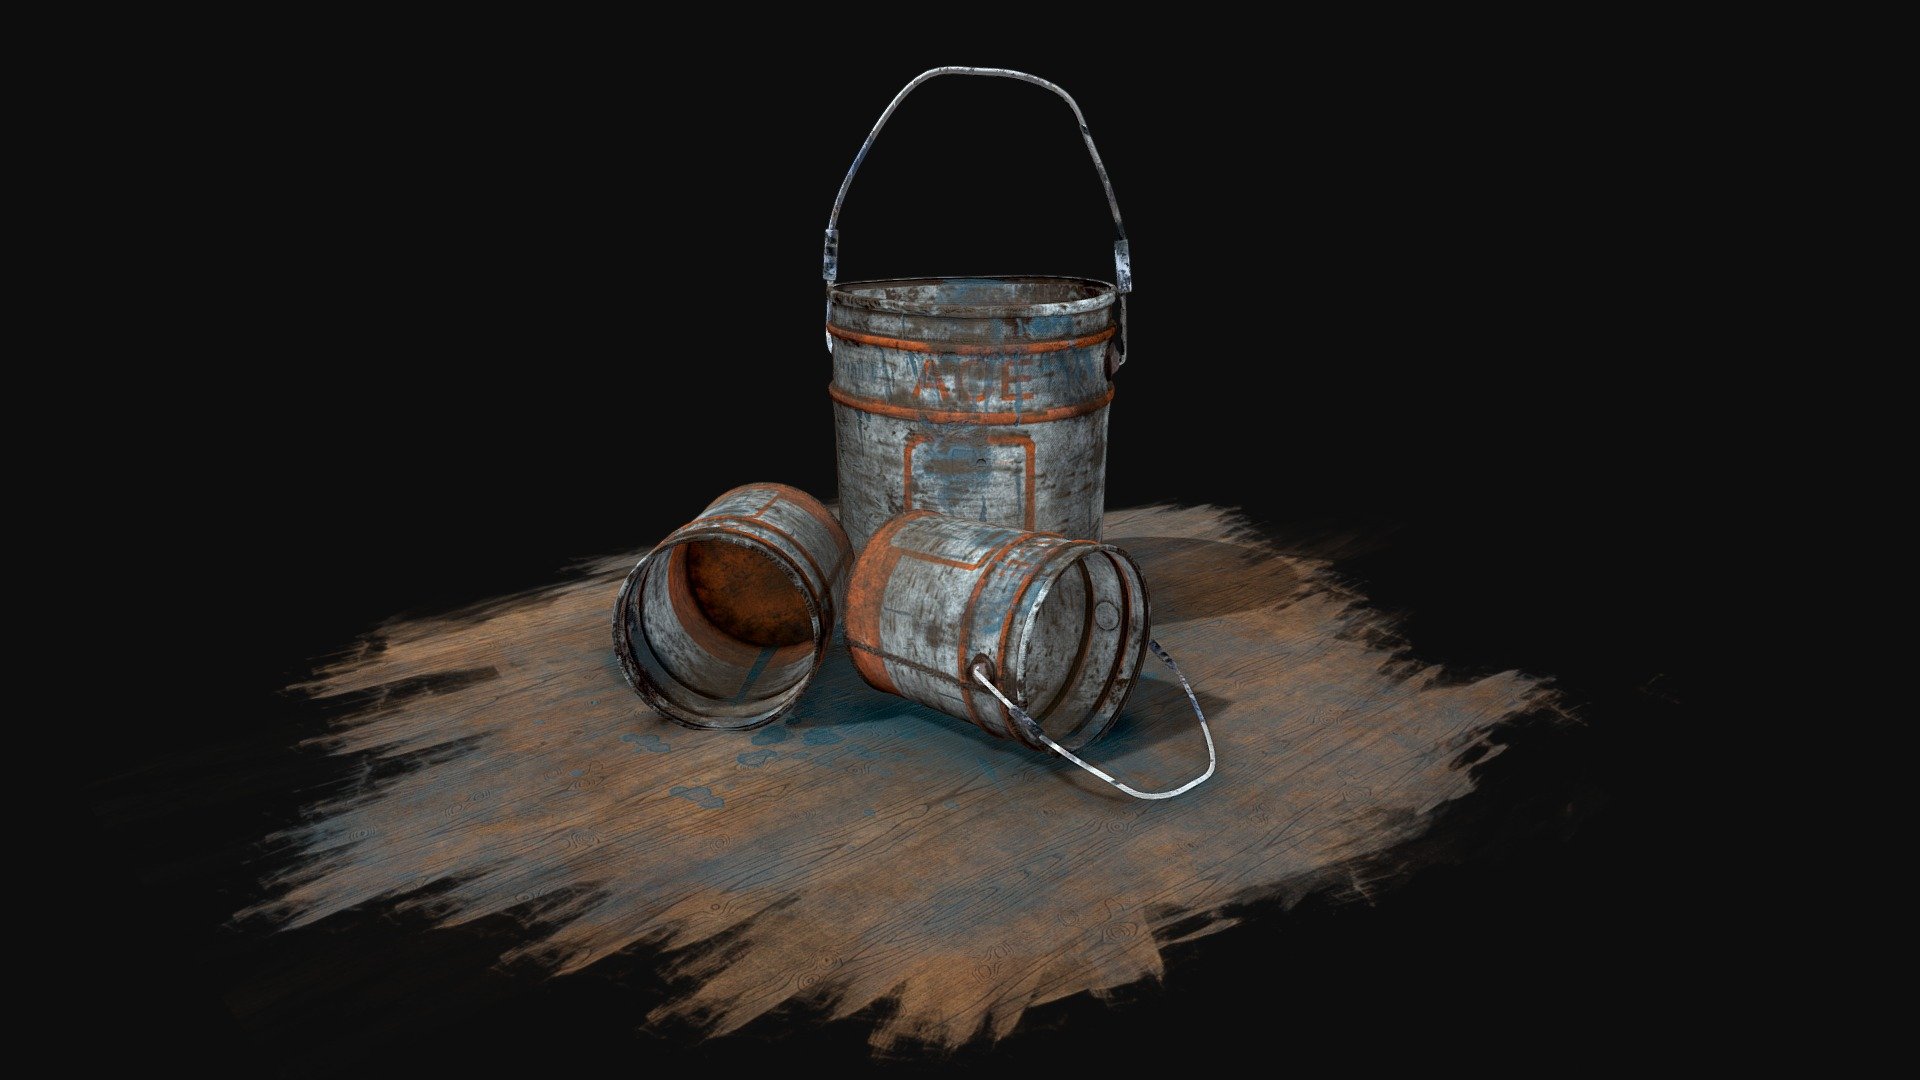 Paint Buckets game asset with PBR textures by 13Particles - Paint Buckets - 3D model by 13 Particles (@13particles) 3d model